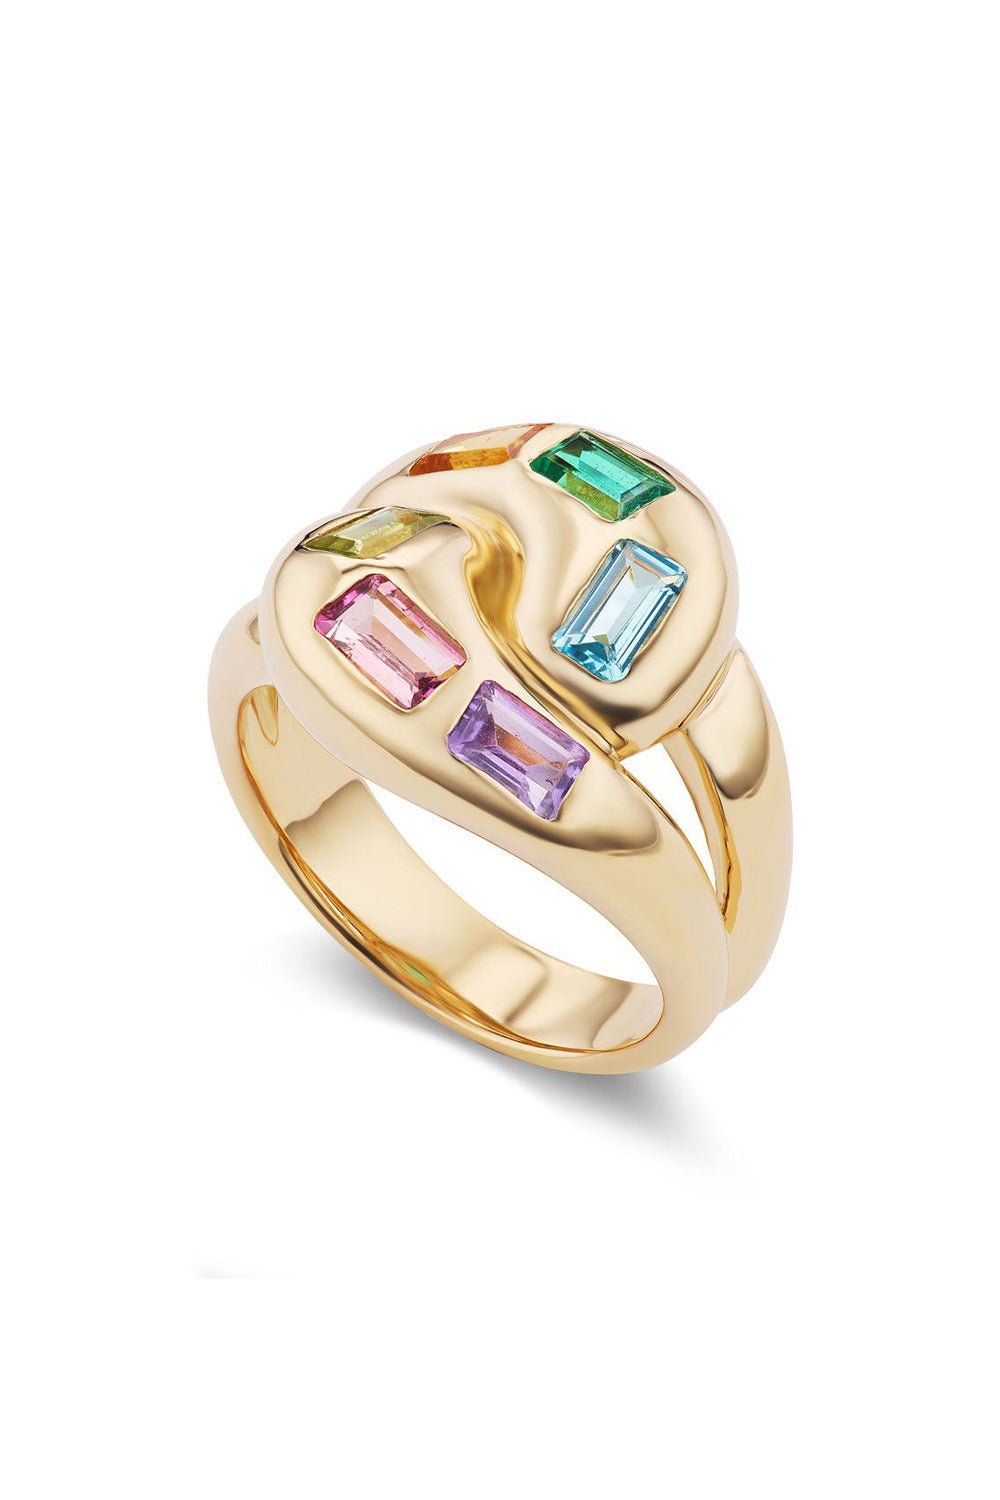 BRENT NEALE-Multi Colored Knot Ring-YELLOW GOLD